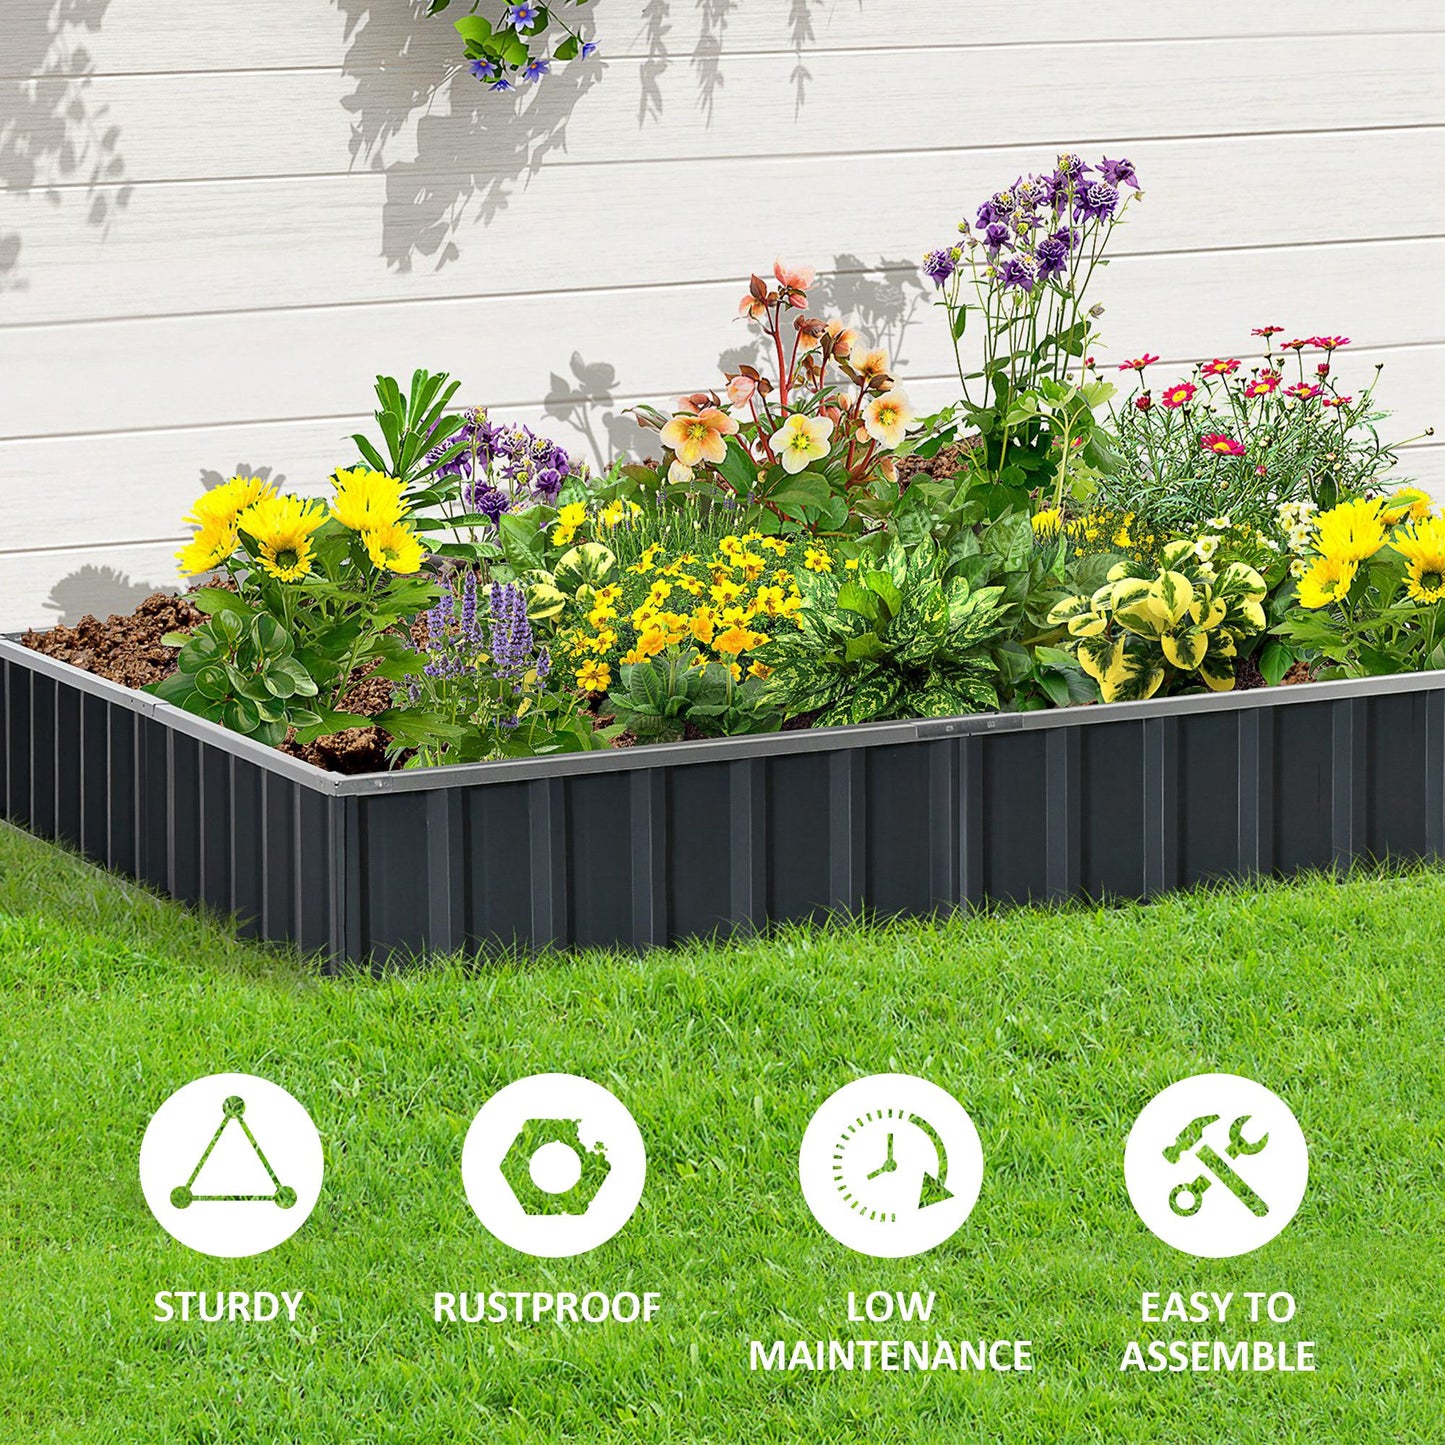 Outsunny Metal Raised Garden Bed, DIY Large Steel Planter Box, No Bottom w/ A Pairs of Glove for Backyard, Patio to Grow Vegetables, Herbs, 258cmx90cm